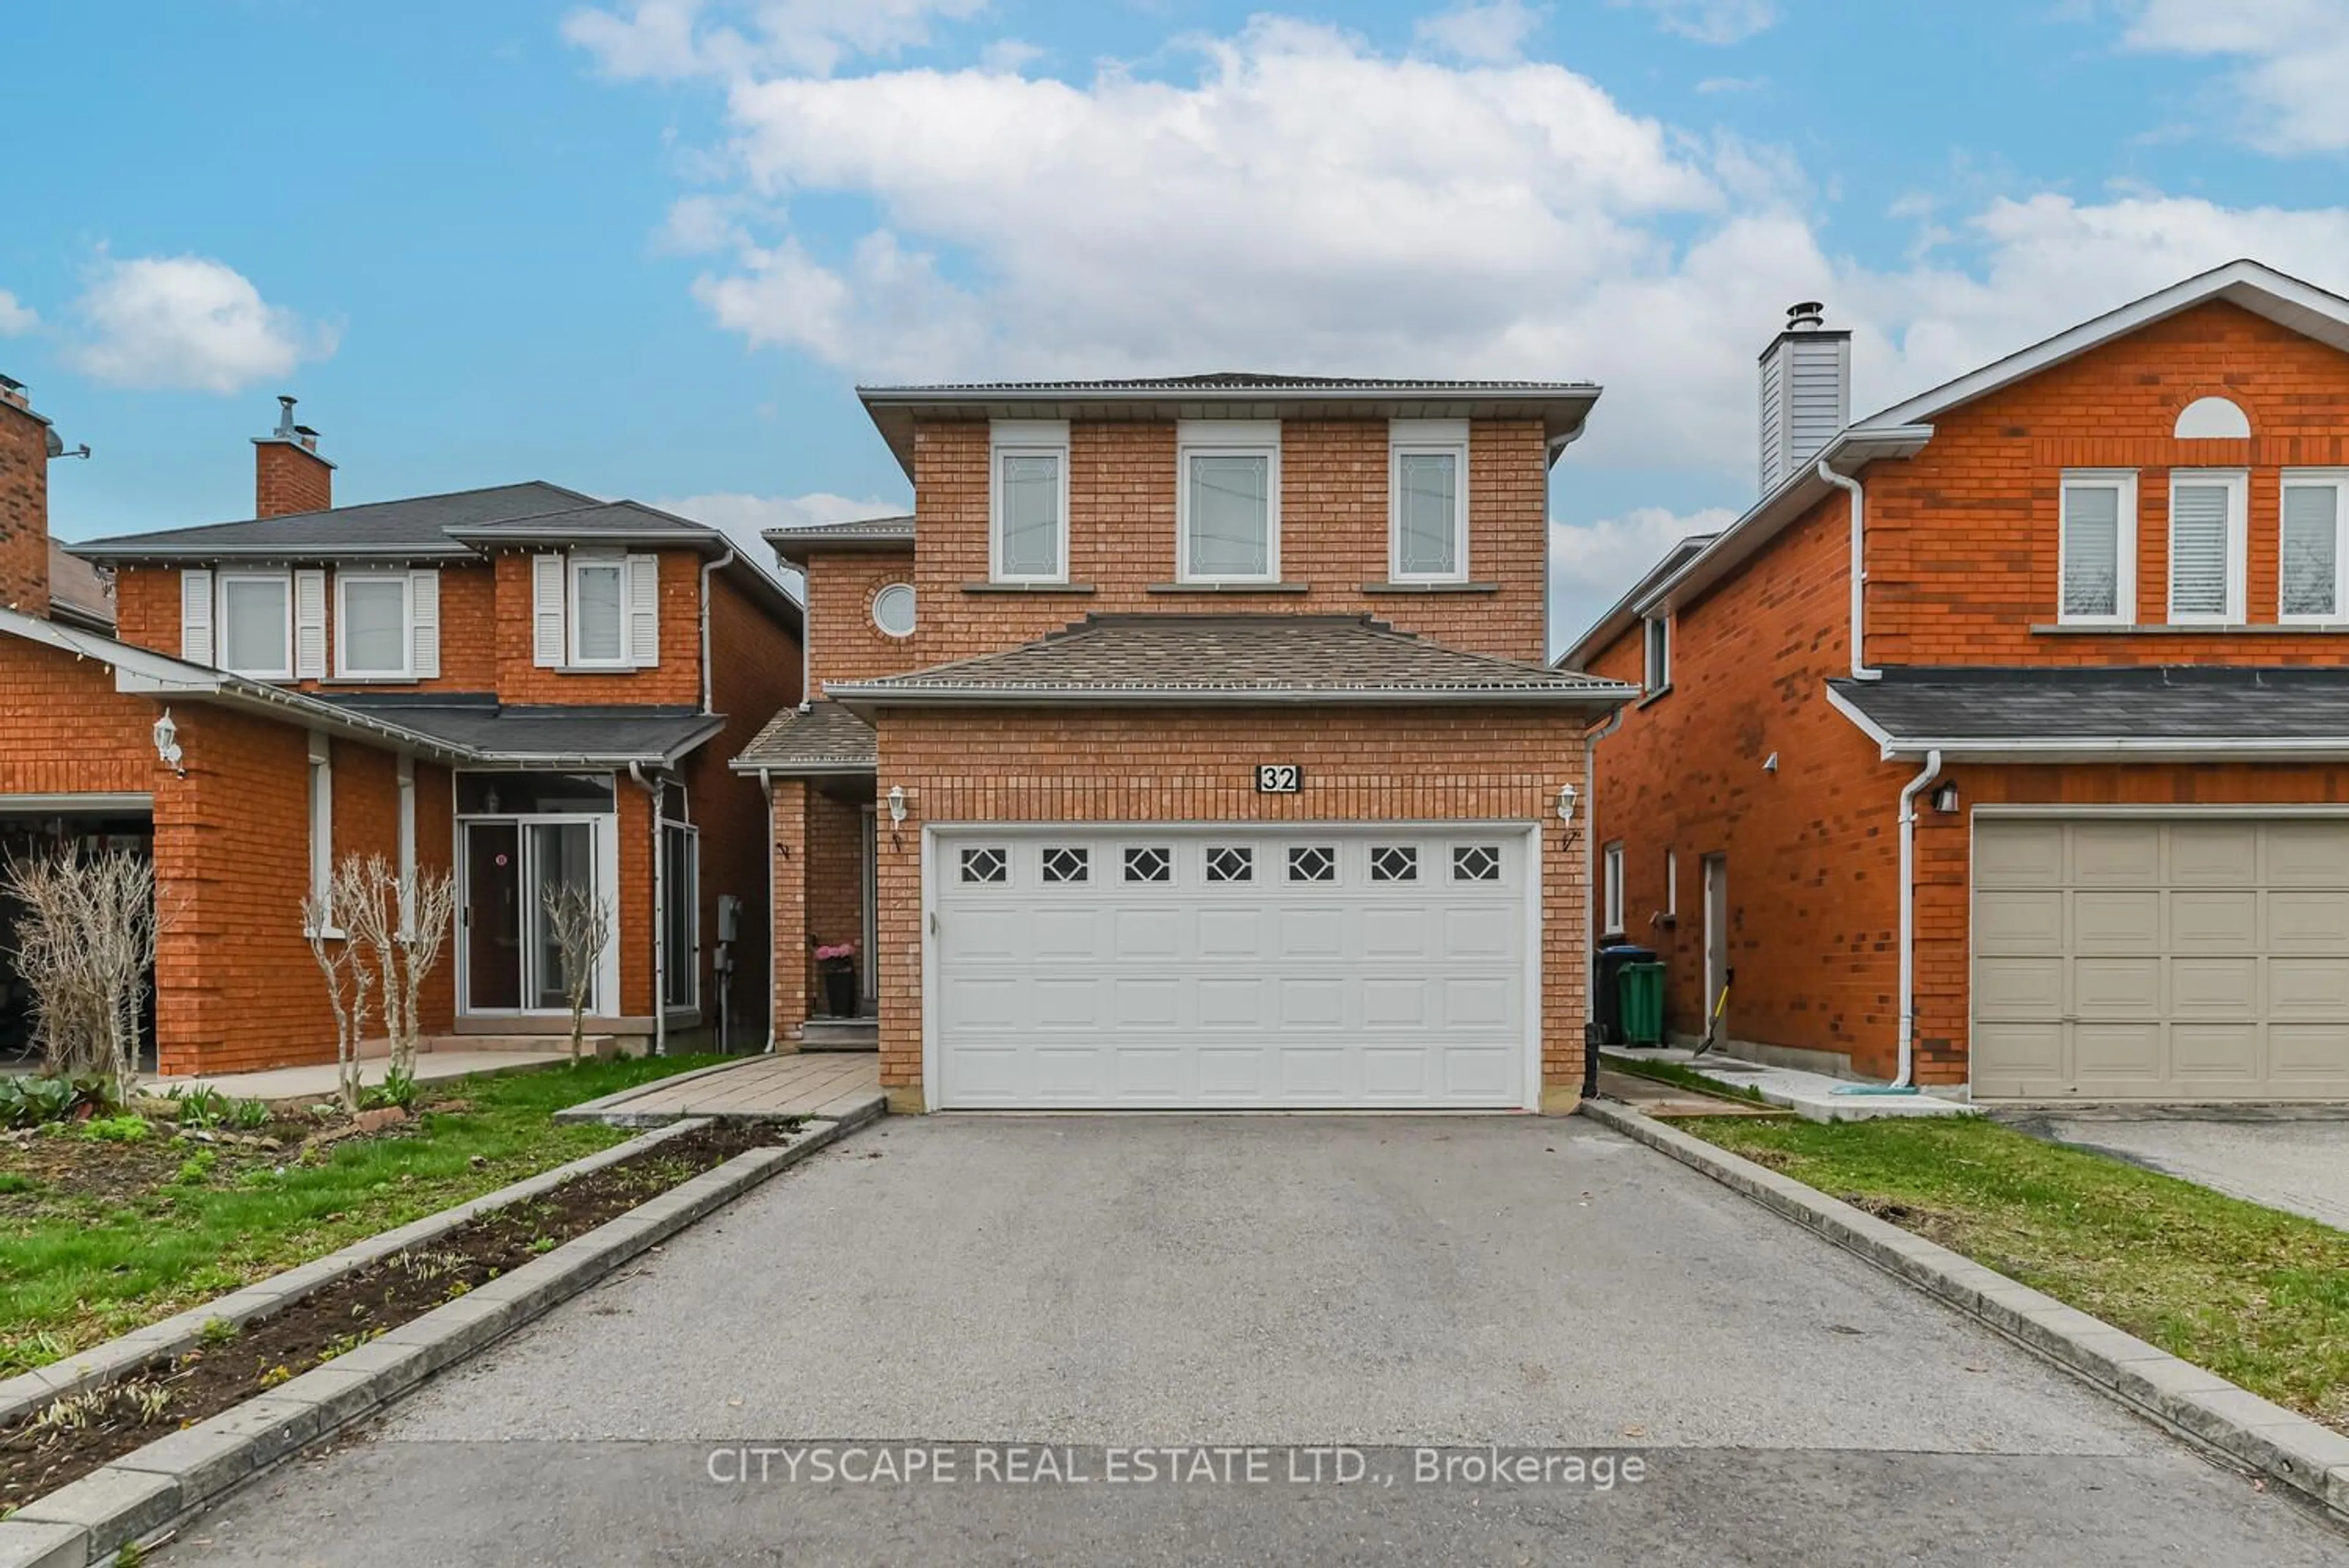 Frontside or backside of a home for 32 Pennsylvania Ave, Brampton Ontario L6Y 4N7